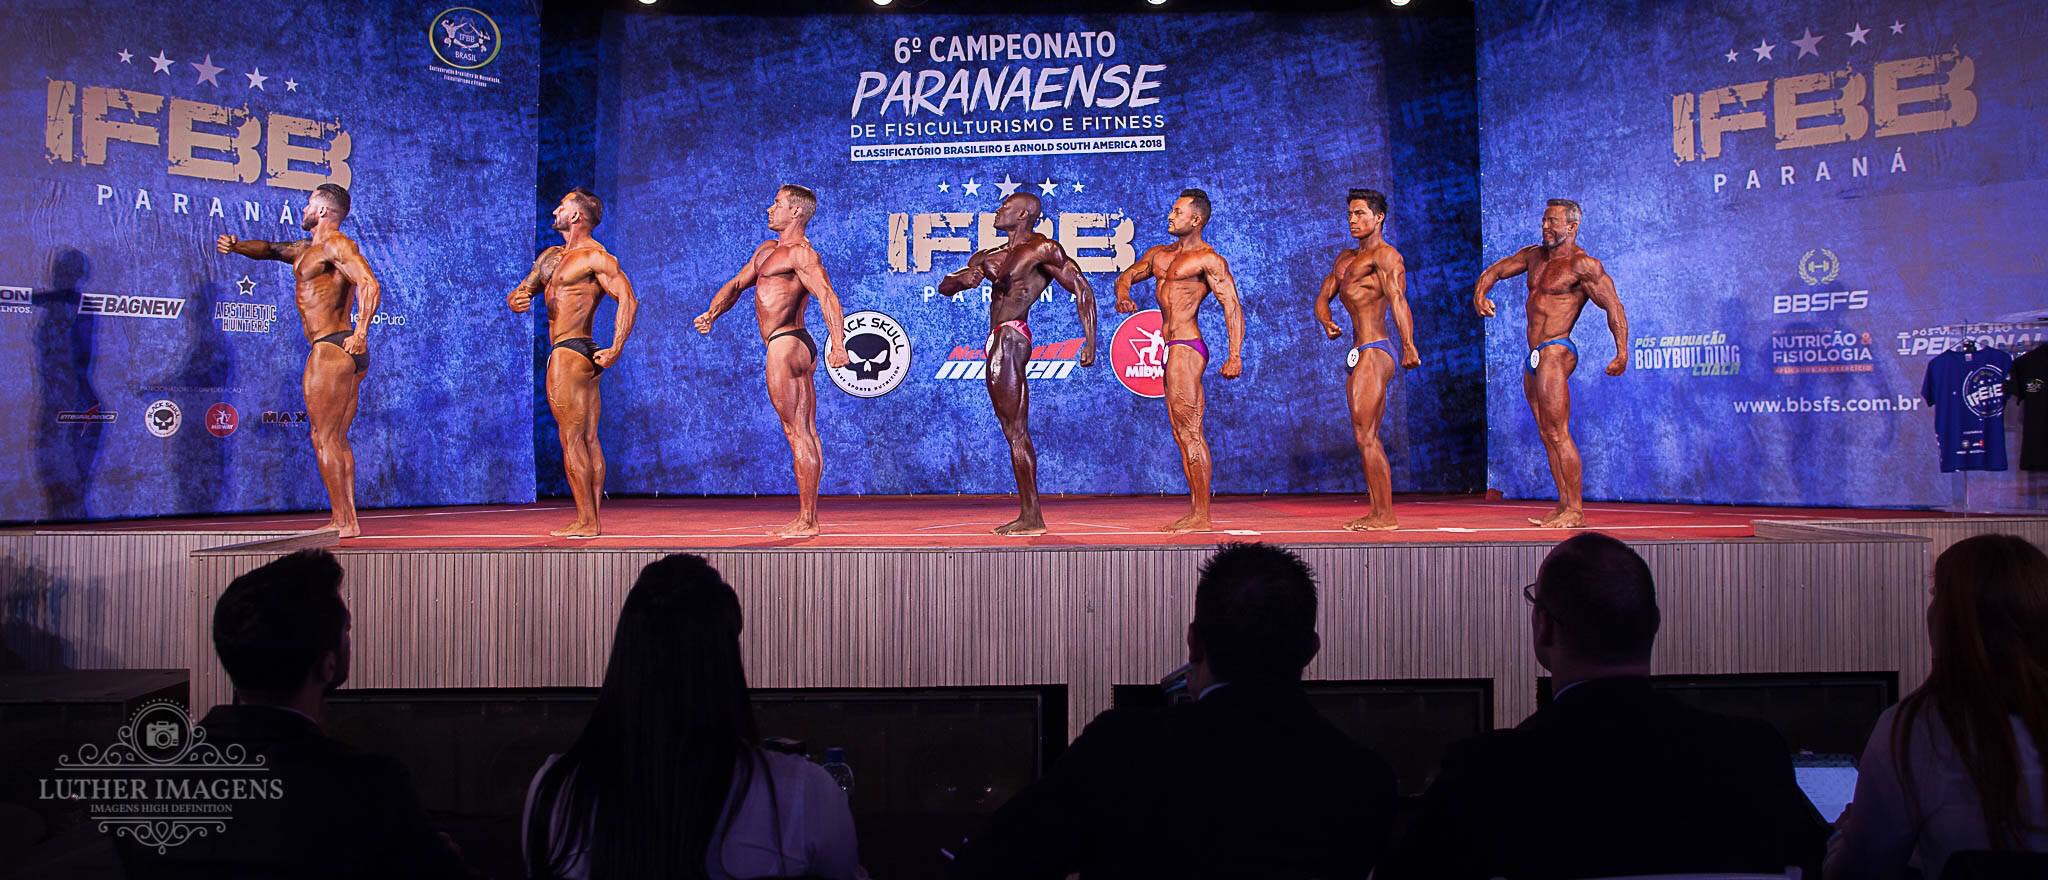 Female athletes at IFBB Paraná Brasil sponsored by midway labs